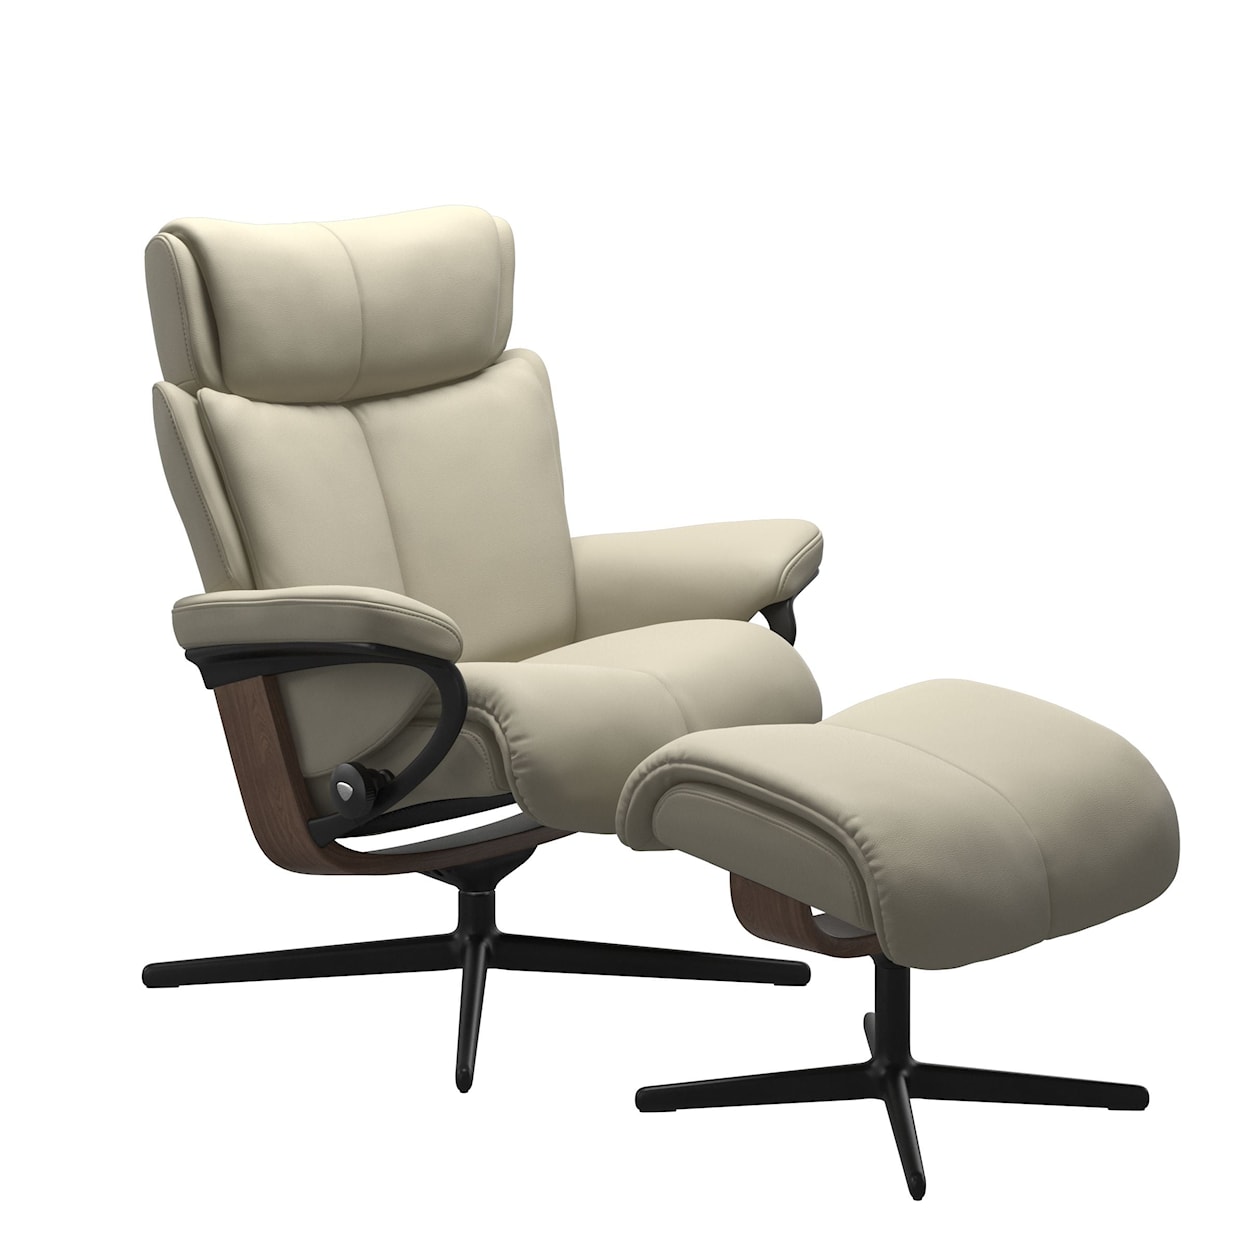 Stressless by Ekornes Magic Magic Large Recliner and Ottoman